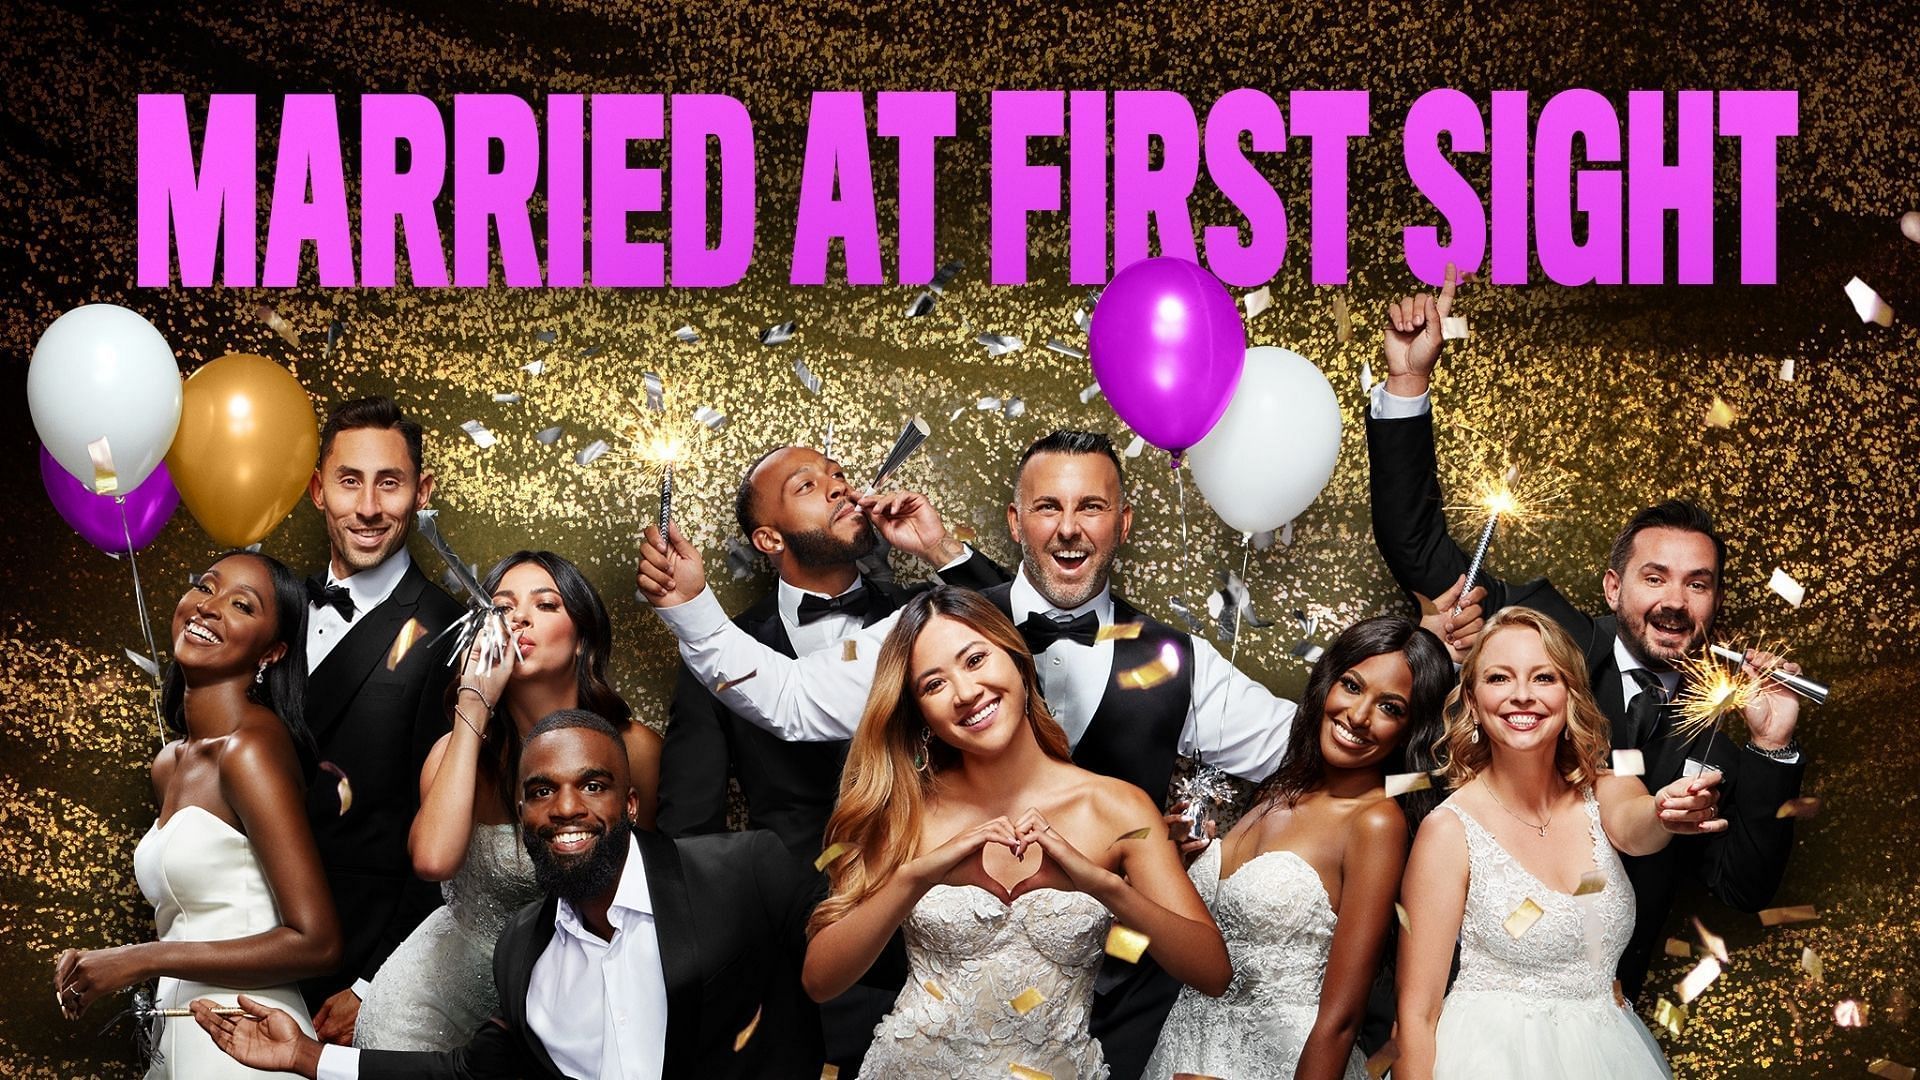 Married At First Sight couples get a second round of expert intervention (Image via Lifetime)